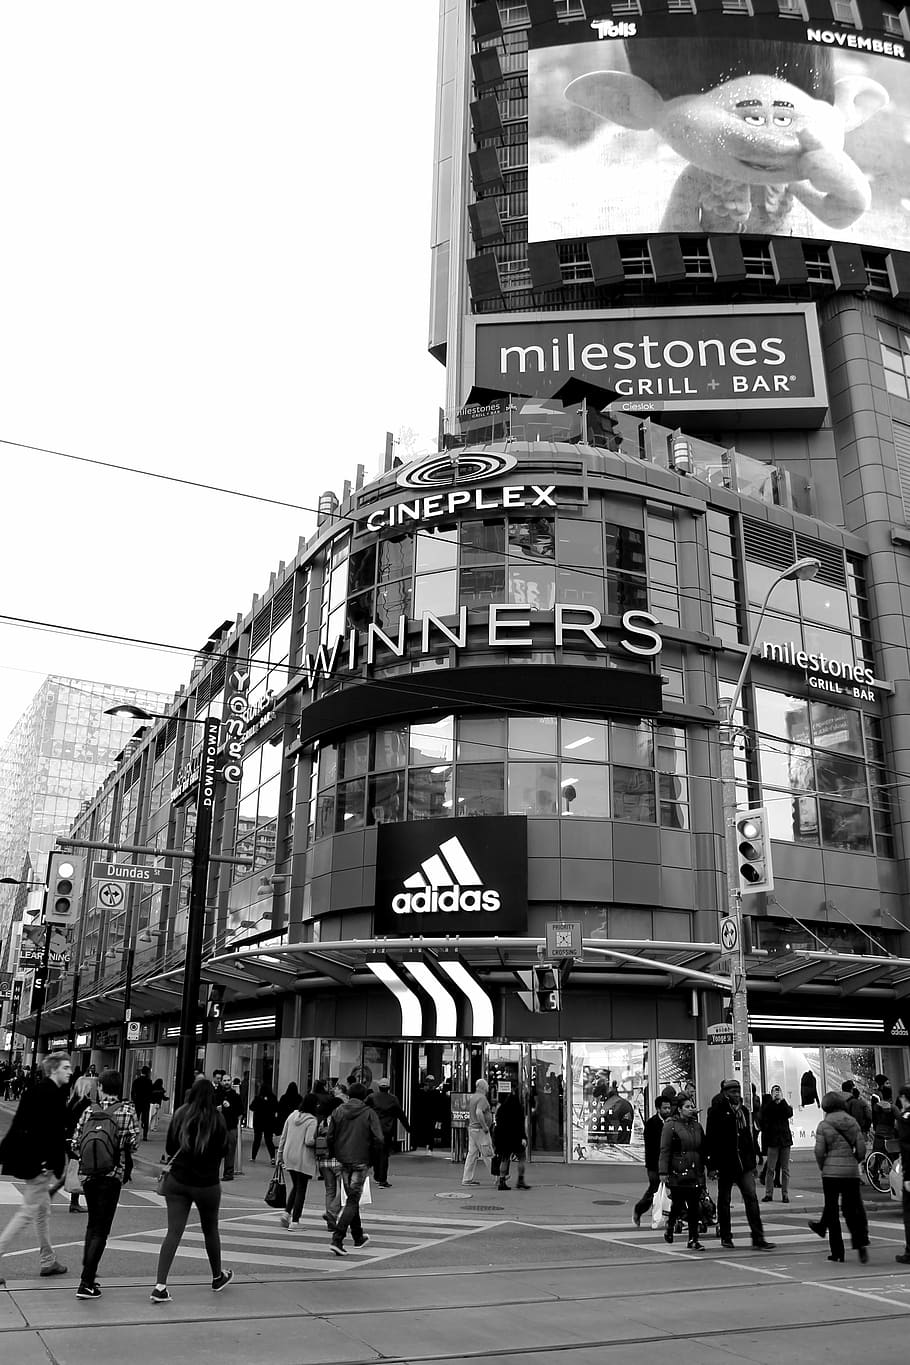 cineplex winners signboard, winners, building, grayscale, photography, monochrome, black and white, urban, city, people